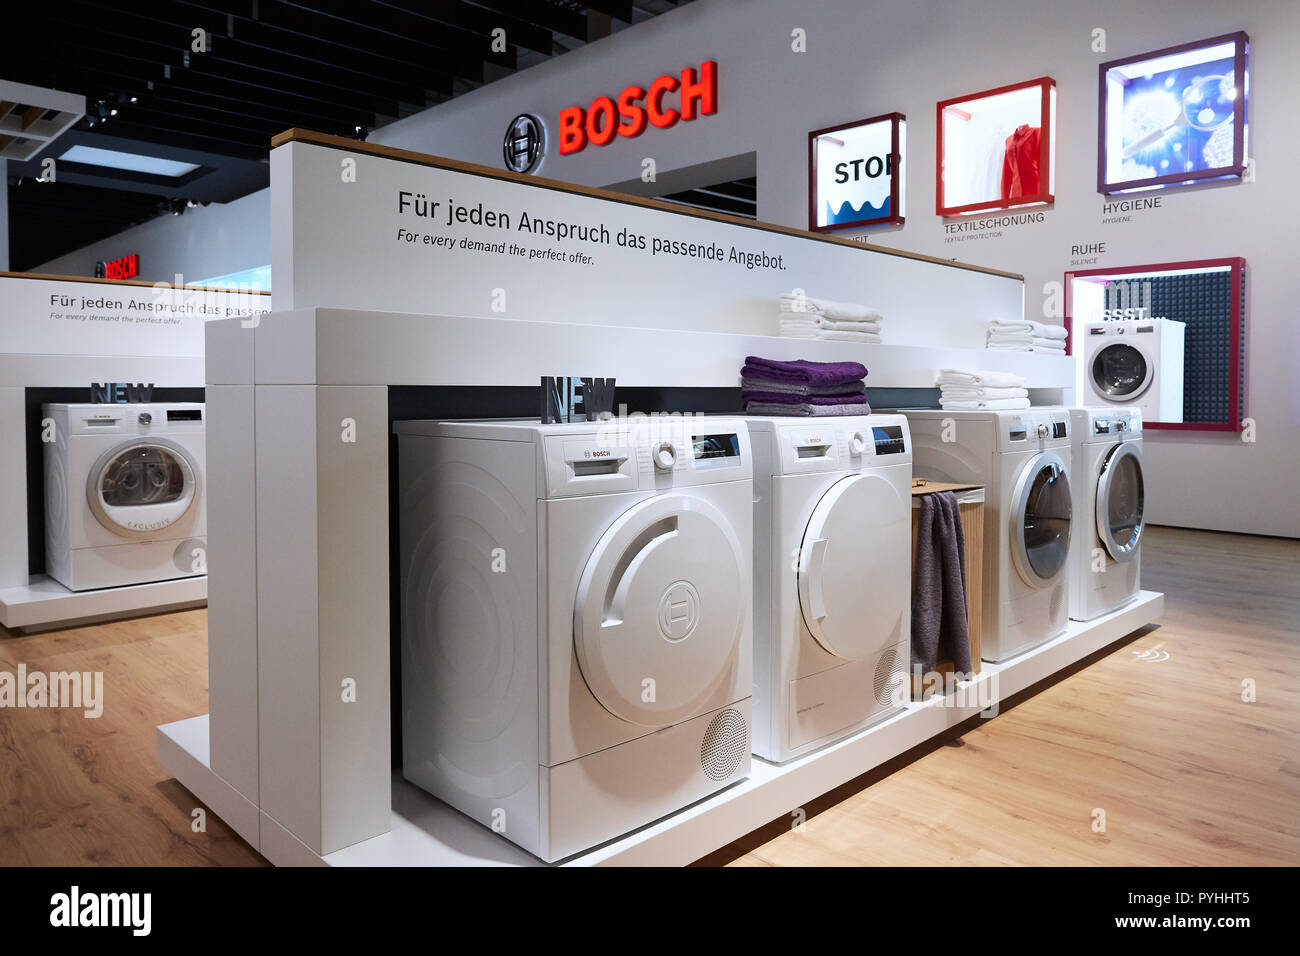 Berlin, Germany - The German company BOSCH will be showcasing its laundry care and washing machine innovations at IFA 2018. Stock Photo